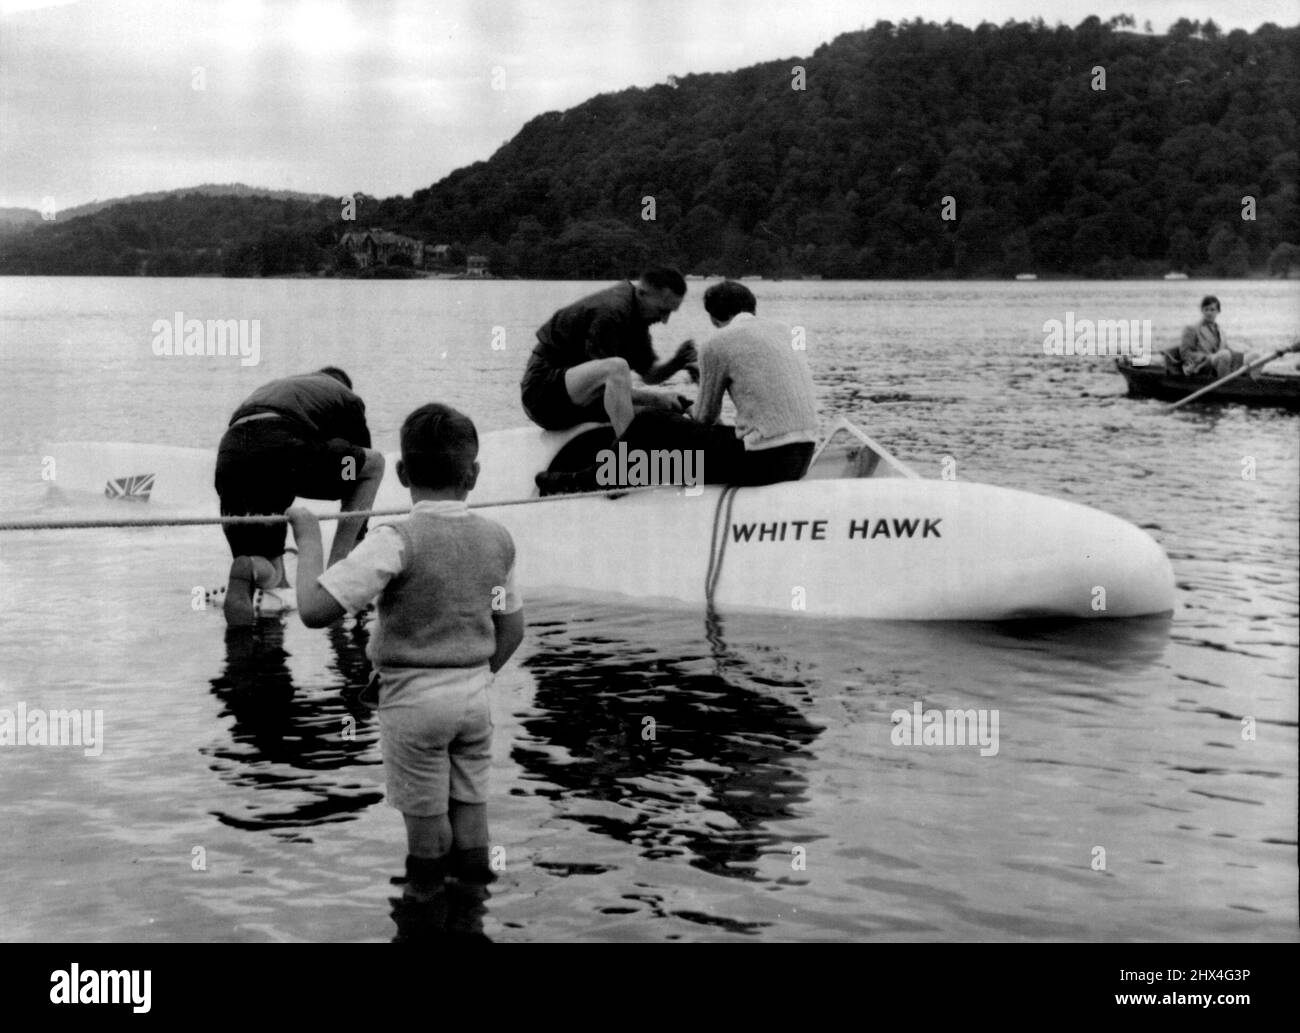 Jet-Boat Dives In Lake During Trial - The White Hawk being hauled to the shore after the mishap. Mr. Frank Hanning-Lee is seated on right.The £14,000 jet-propelled speed boat White Hawk, in which Mr. Frank Hanning-Lee, on naval officer, of Chelsea, London, and his wife Stella hope to rapture the the world's water speed record for Britain, dived briefly under the surface of the lake in a mishap during a trial run on Windermera, Mr. Hanning-Lee was piloting the boat when it was struck by side-wash from a pleasure boat. Water entered the air intake and the White Hawk dived nose first, filling wit Stock Photo